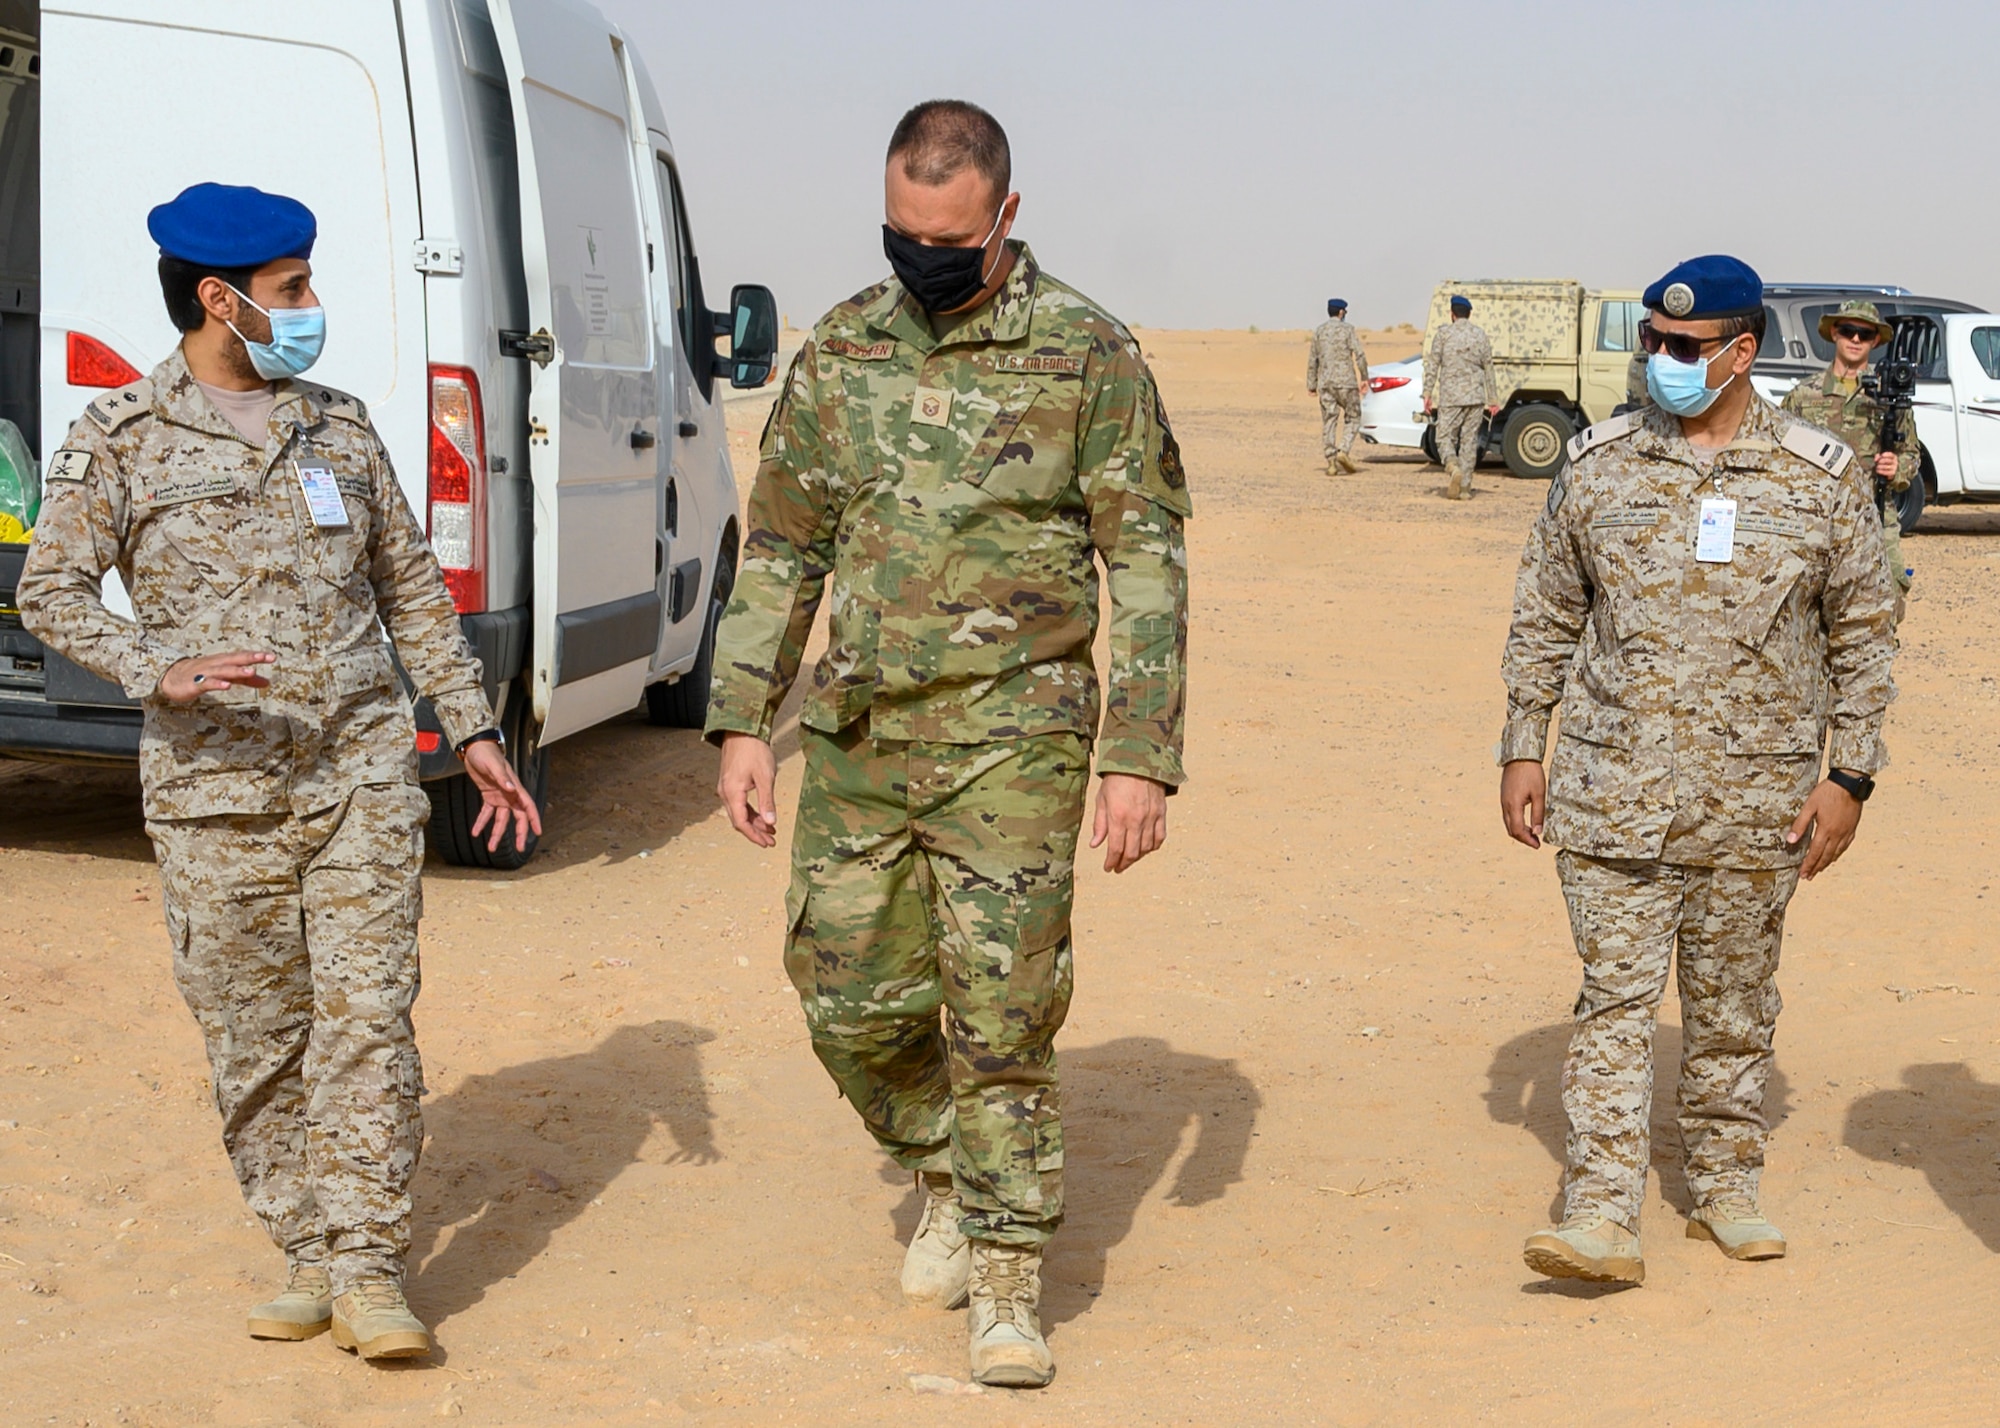 U.S. Air Force Master Sgt. Nathan Hargrafen, 378th Civil Engineer Squadron emergency management flight chief, explains the steps of a CBRN exercise with members of the Royal Saudi Air Force, Prince Sultan Air Base, Kingdom of Saudi Arabia, May 26, 2021. The combined exercise demonstrates the emergency management integration between USAF and RSAF CBRN response units while also familiarizing each unit with the other’s techniques and procedures. (U.S. Air Force photo by Senior Airman Samuel Earick)